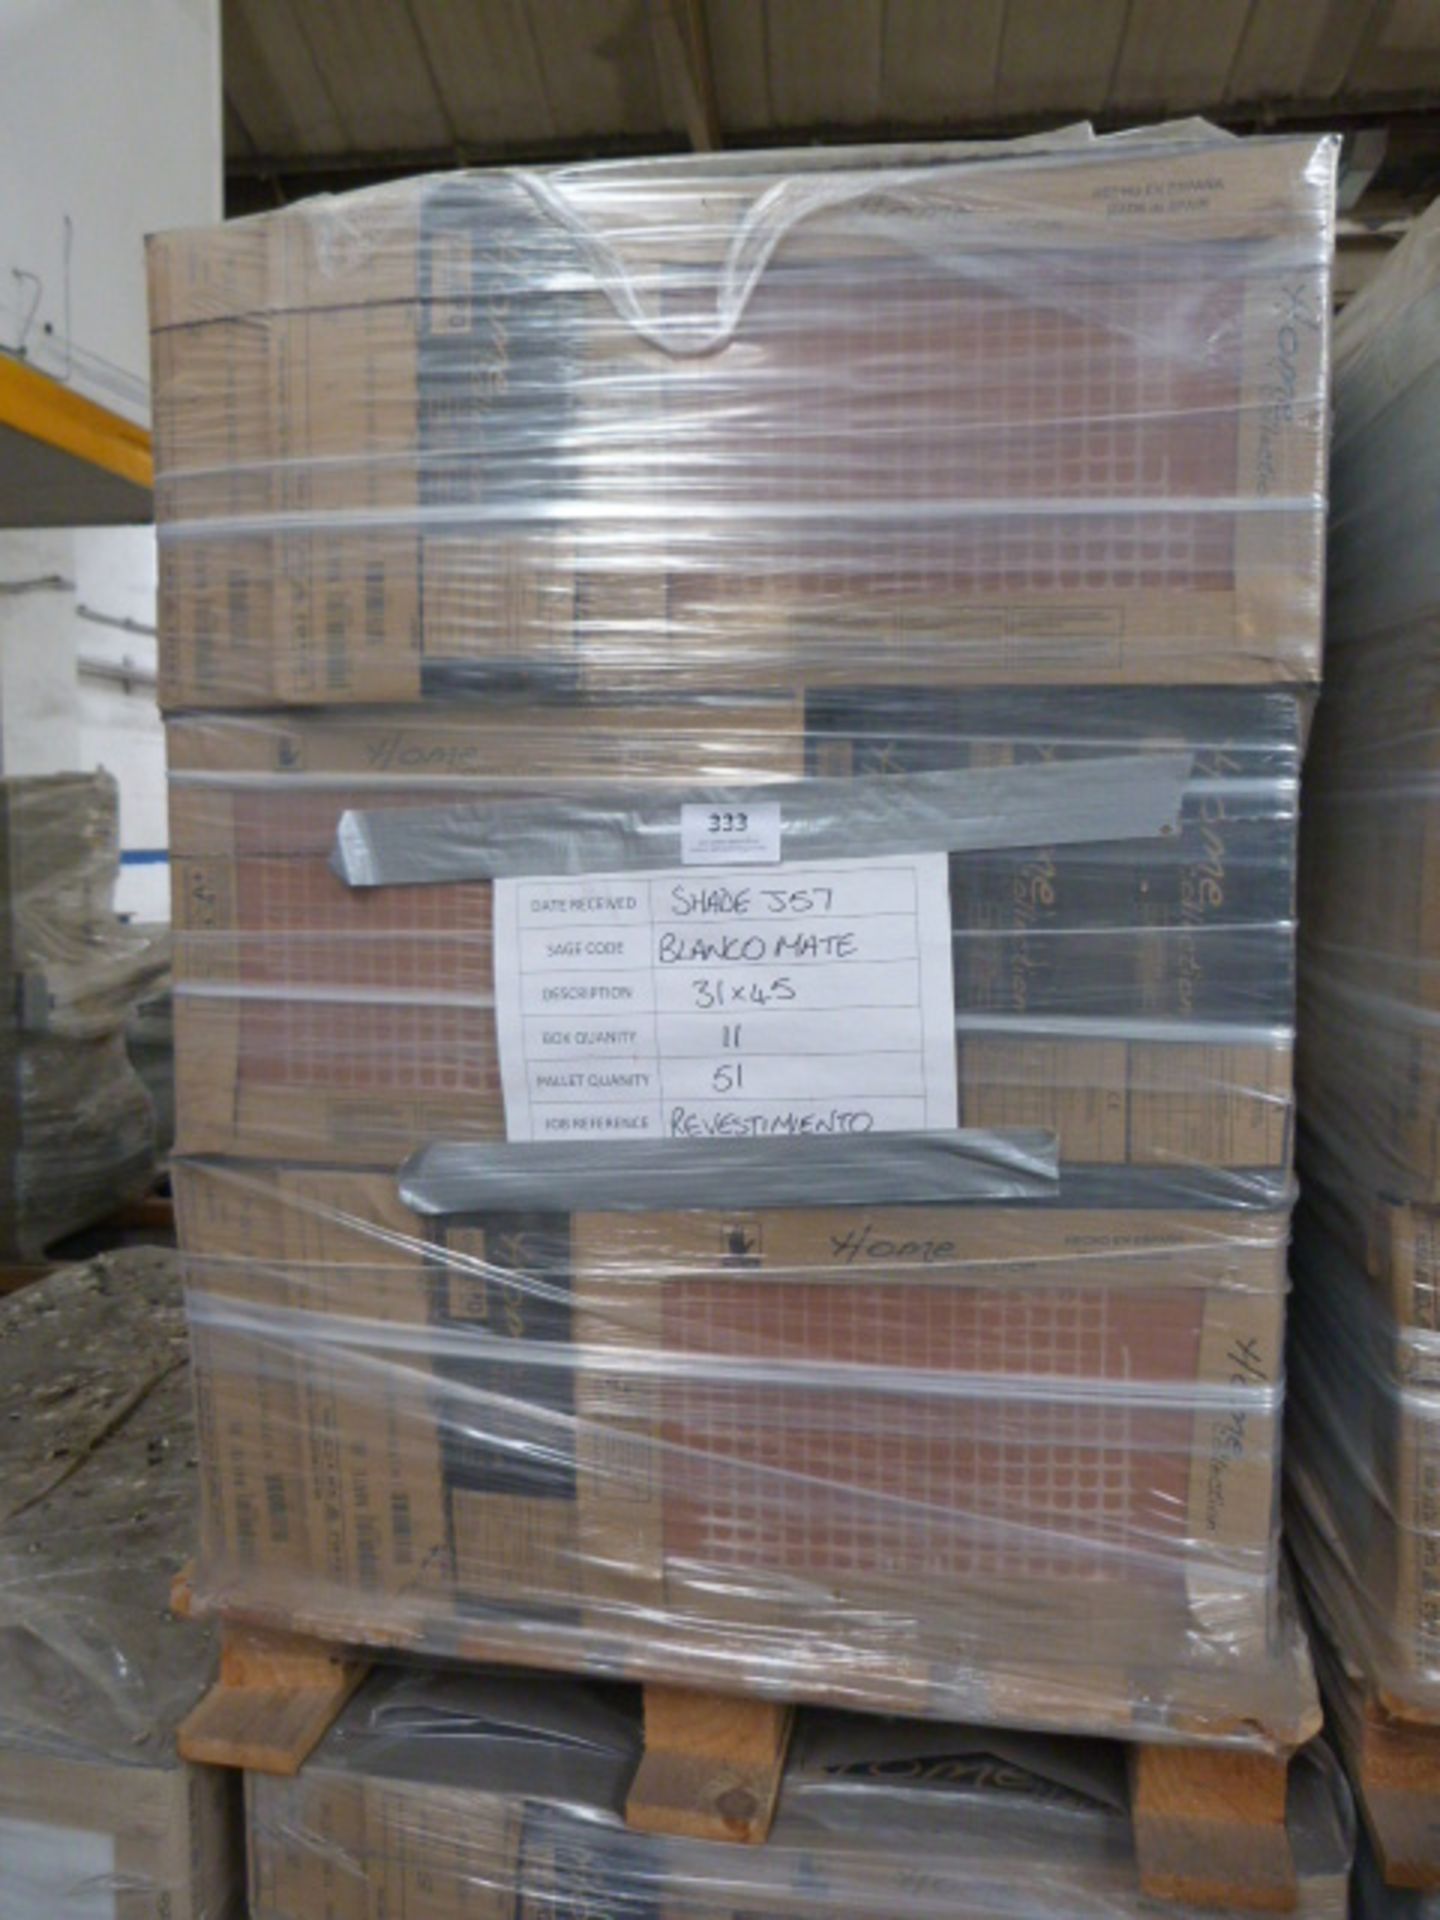 *Pallet Containing 51 Boxes of Revestimento Blanco